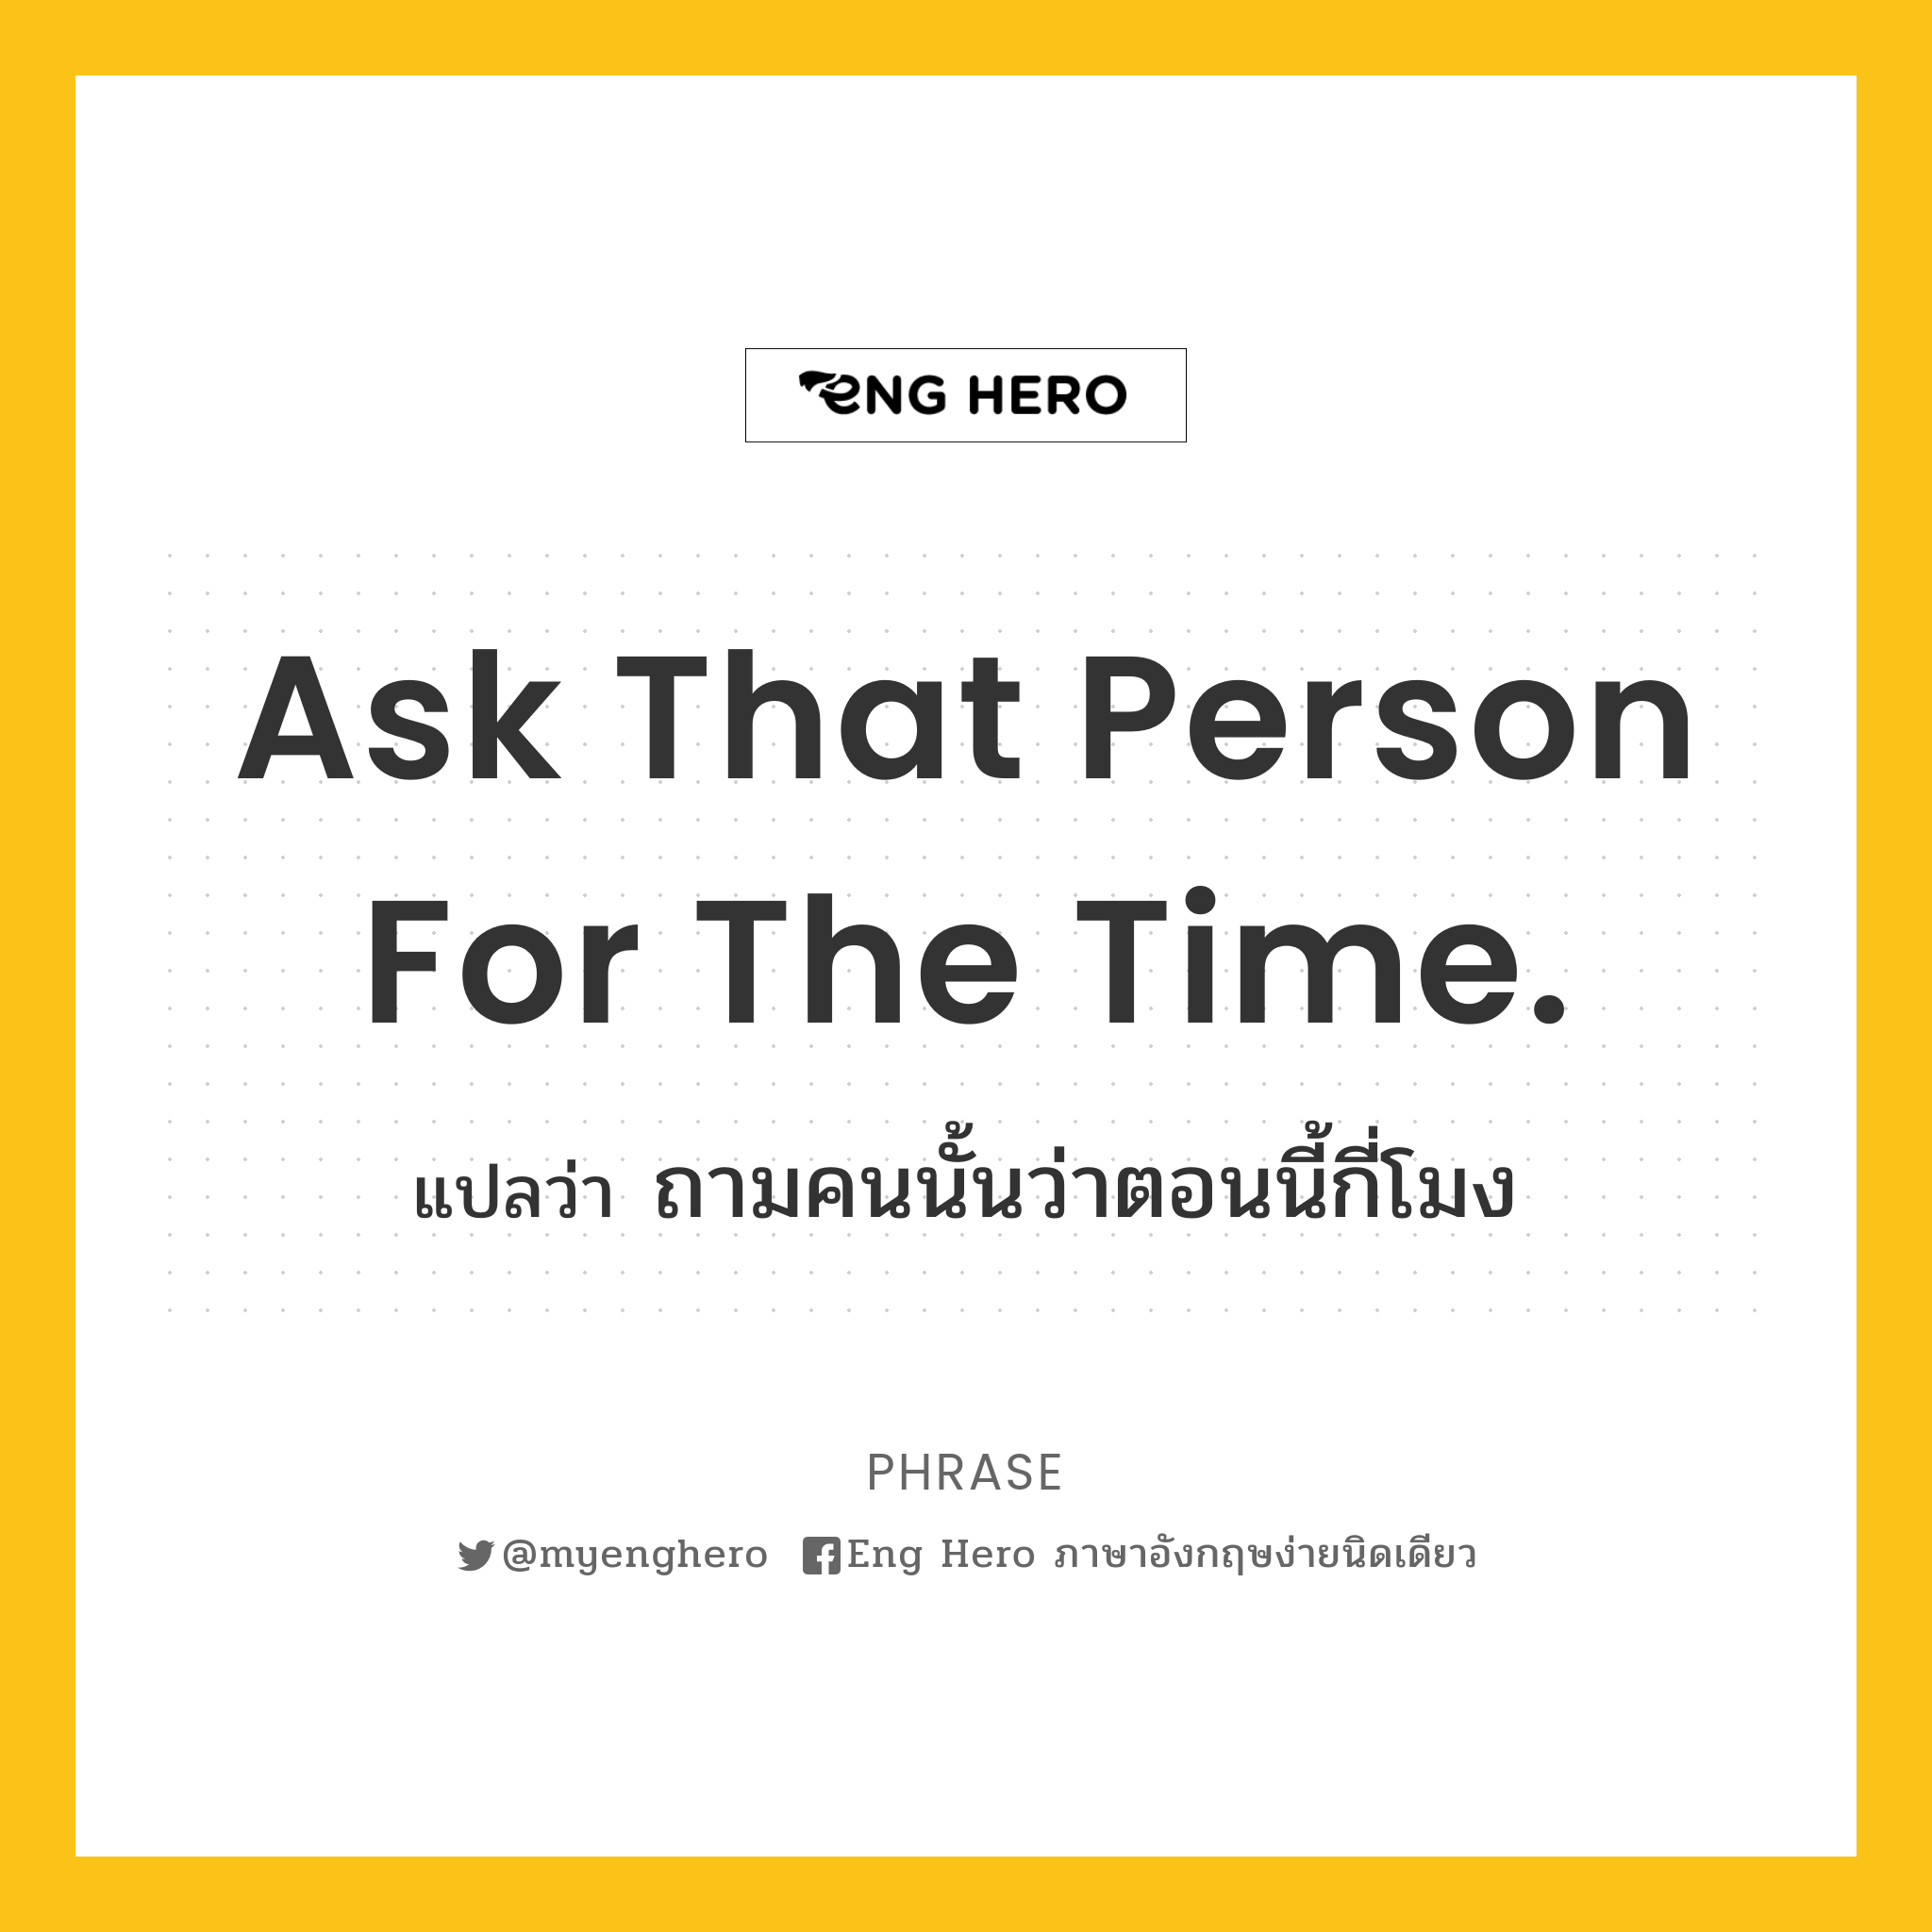 Ask that person for the time.